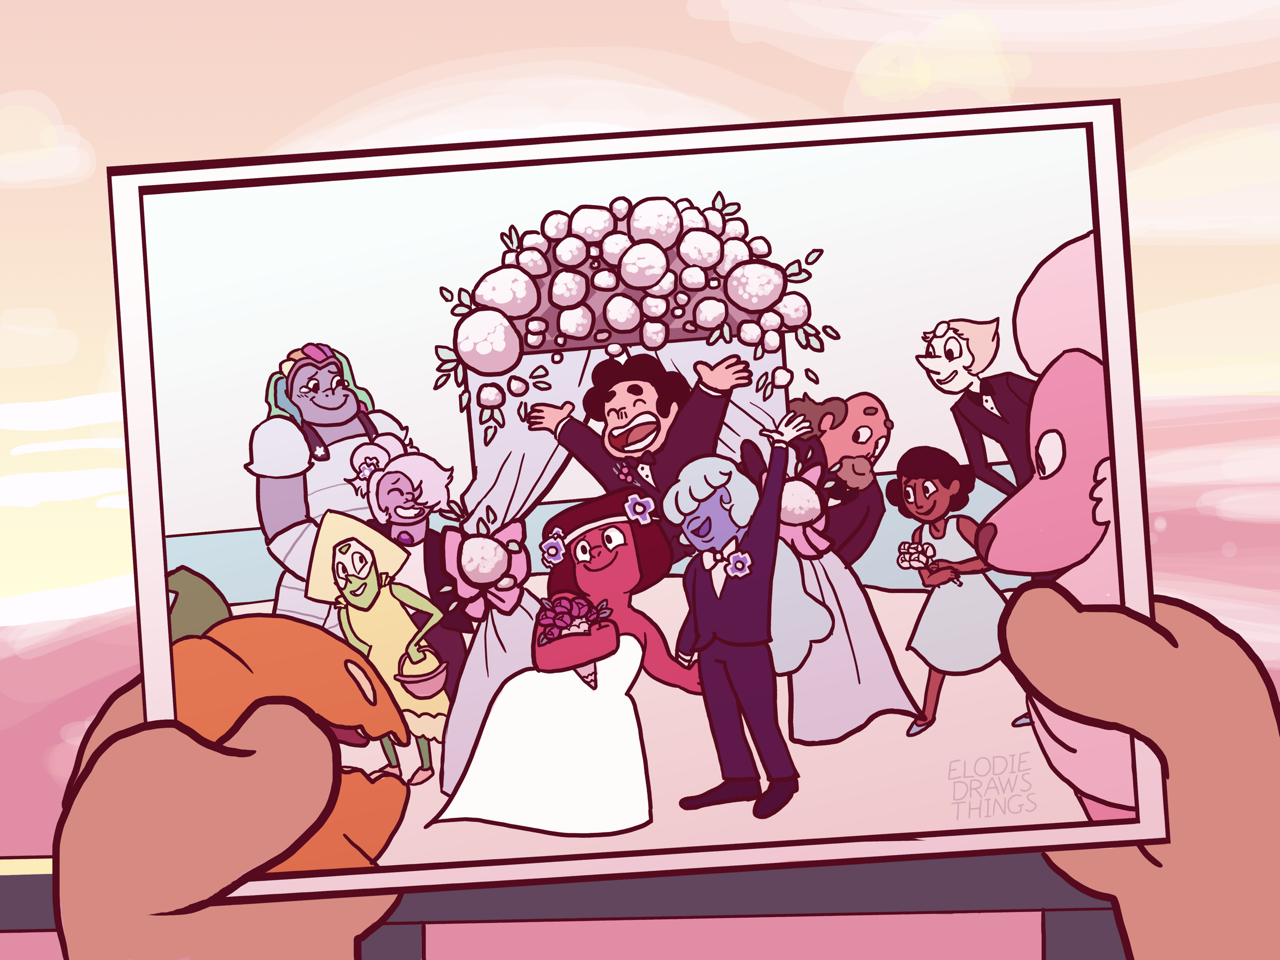 Screencap redraw of the comic book wedding shot, but with the rupphire wedding!! This was so fun to do 💕 (click for better res obv)